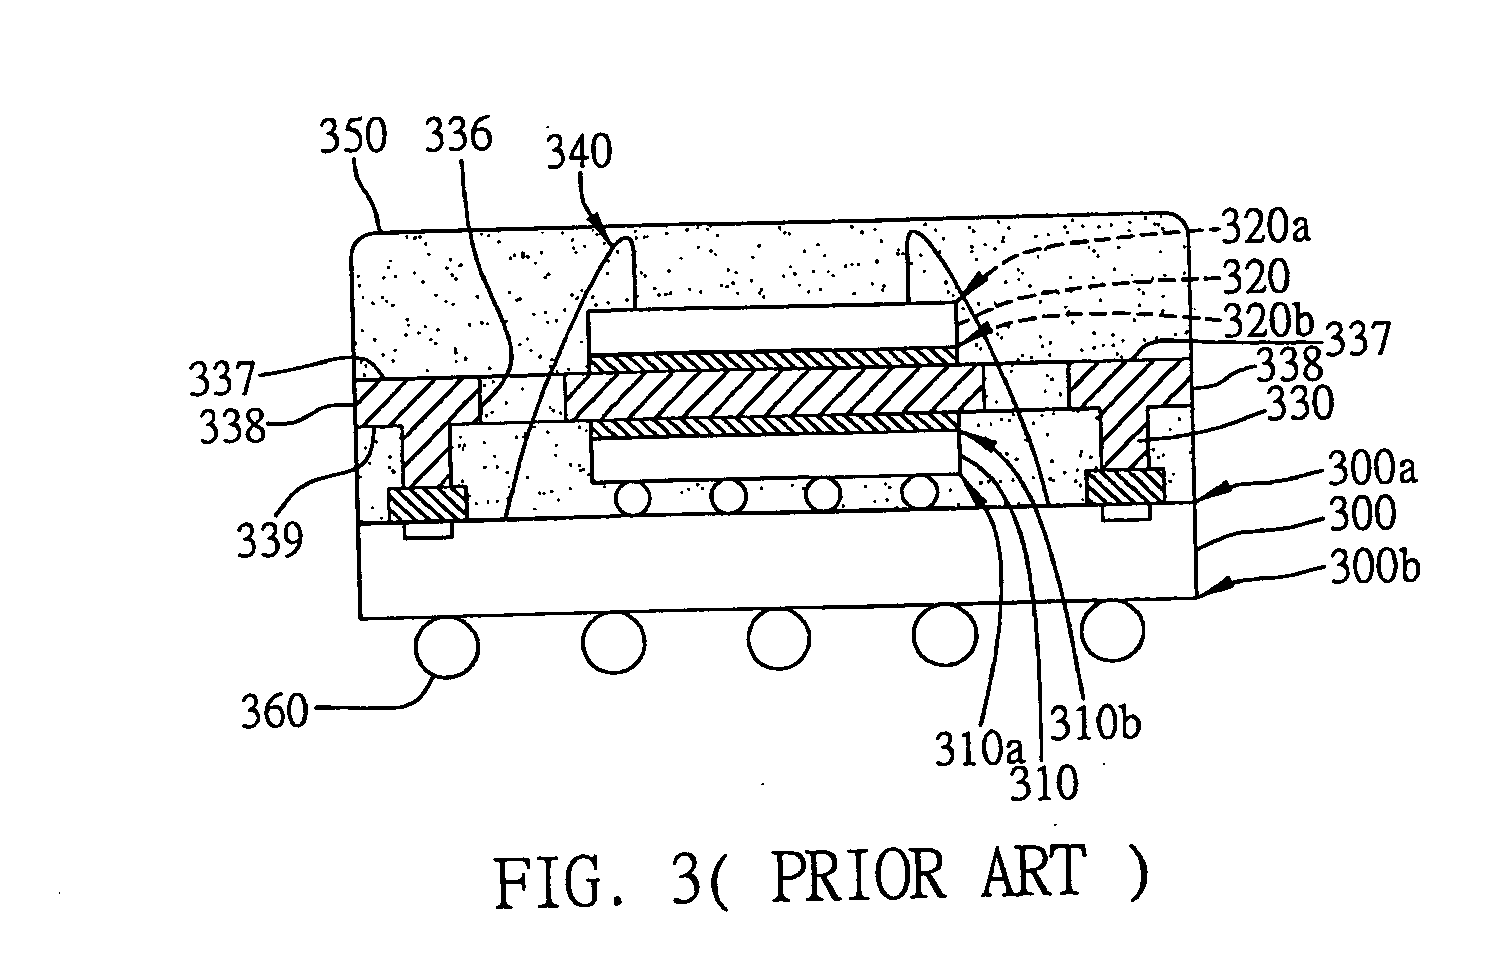 Chip-stacked semiconductor package and method for fabricating the same